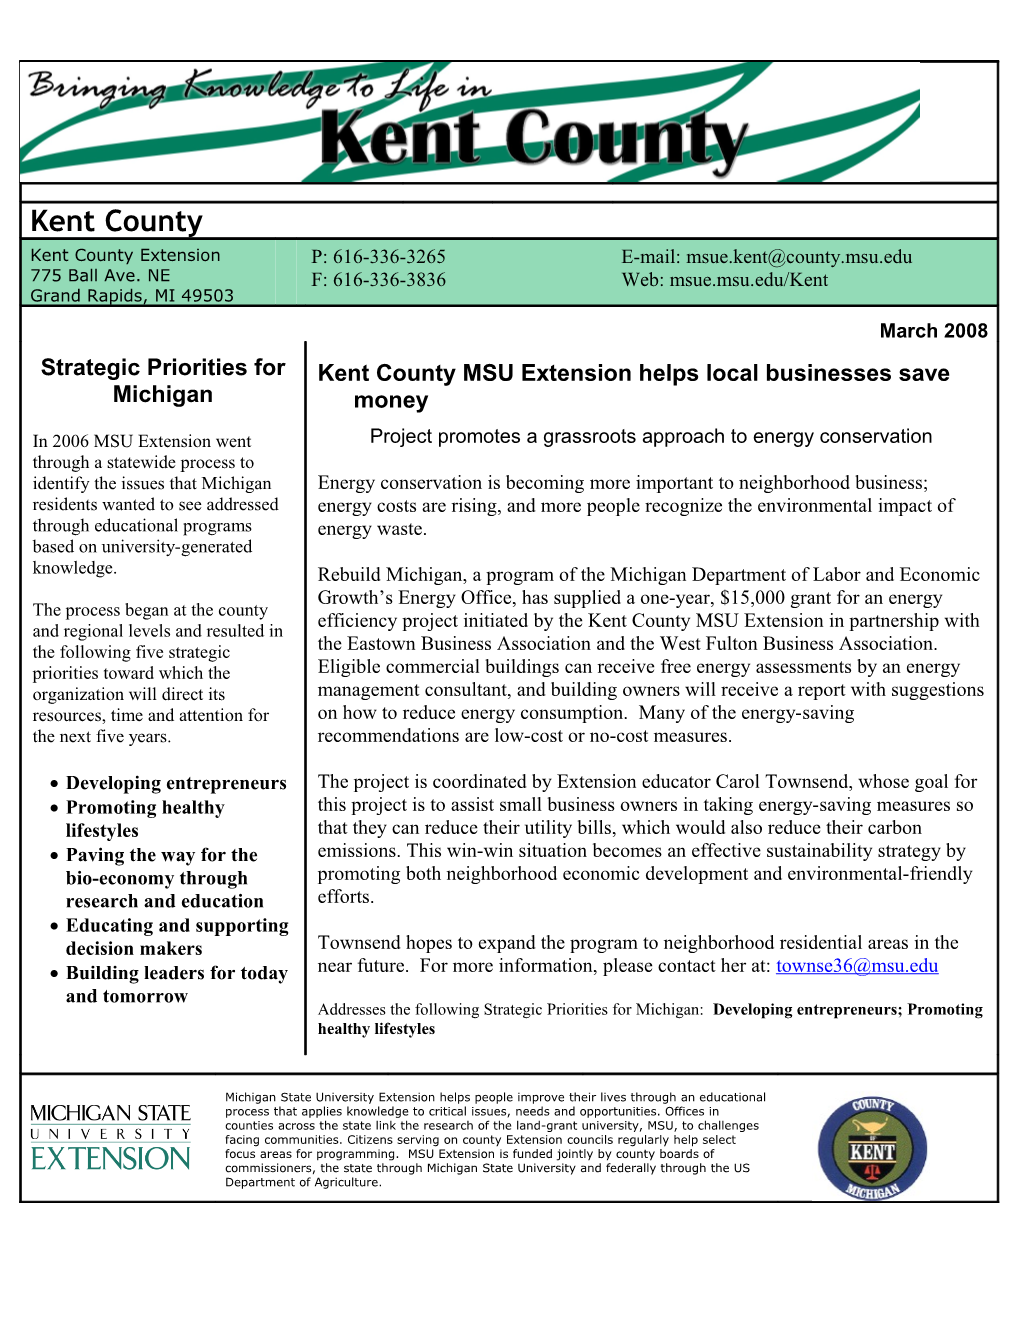 Kent County MSU Extension Helps Local Businesses Save Money